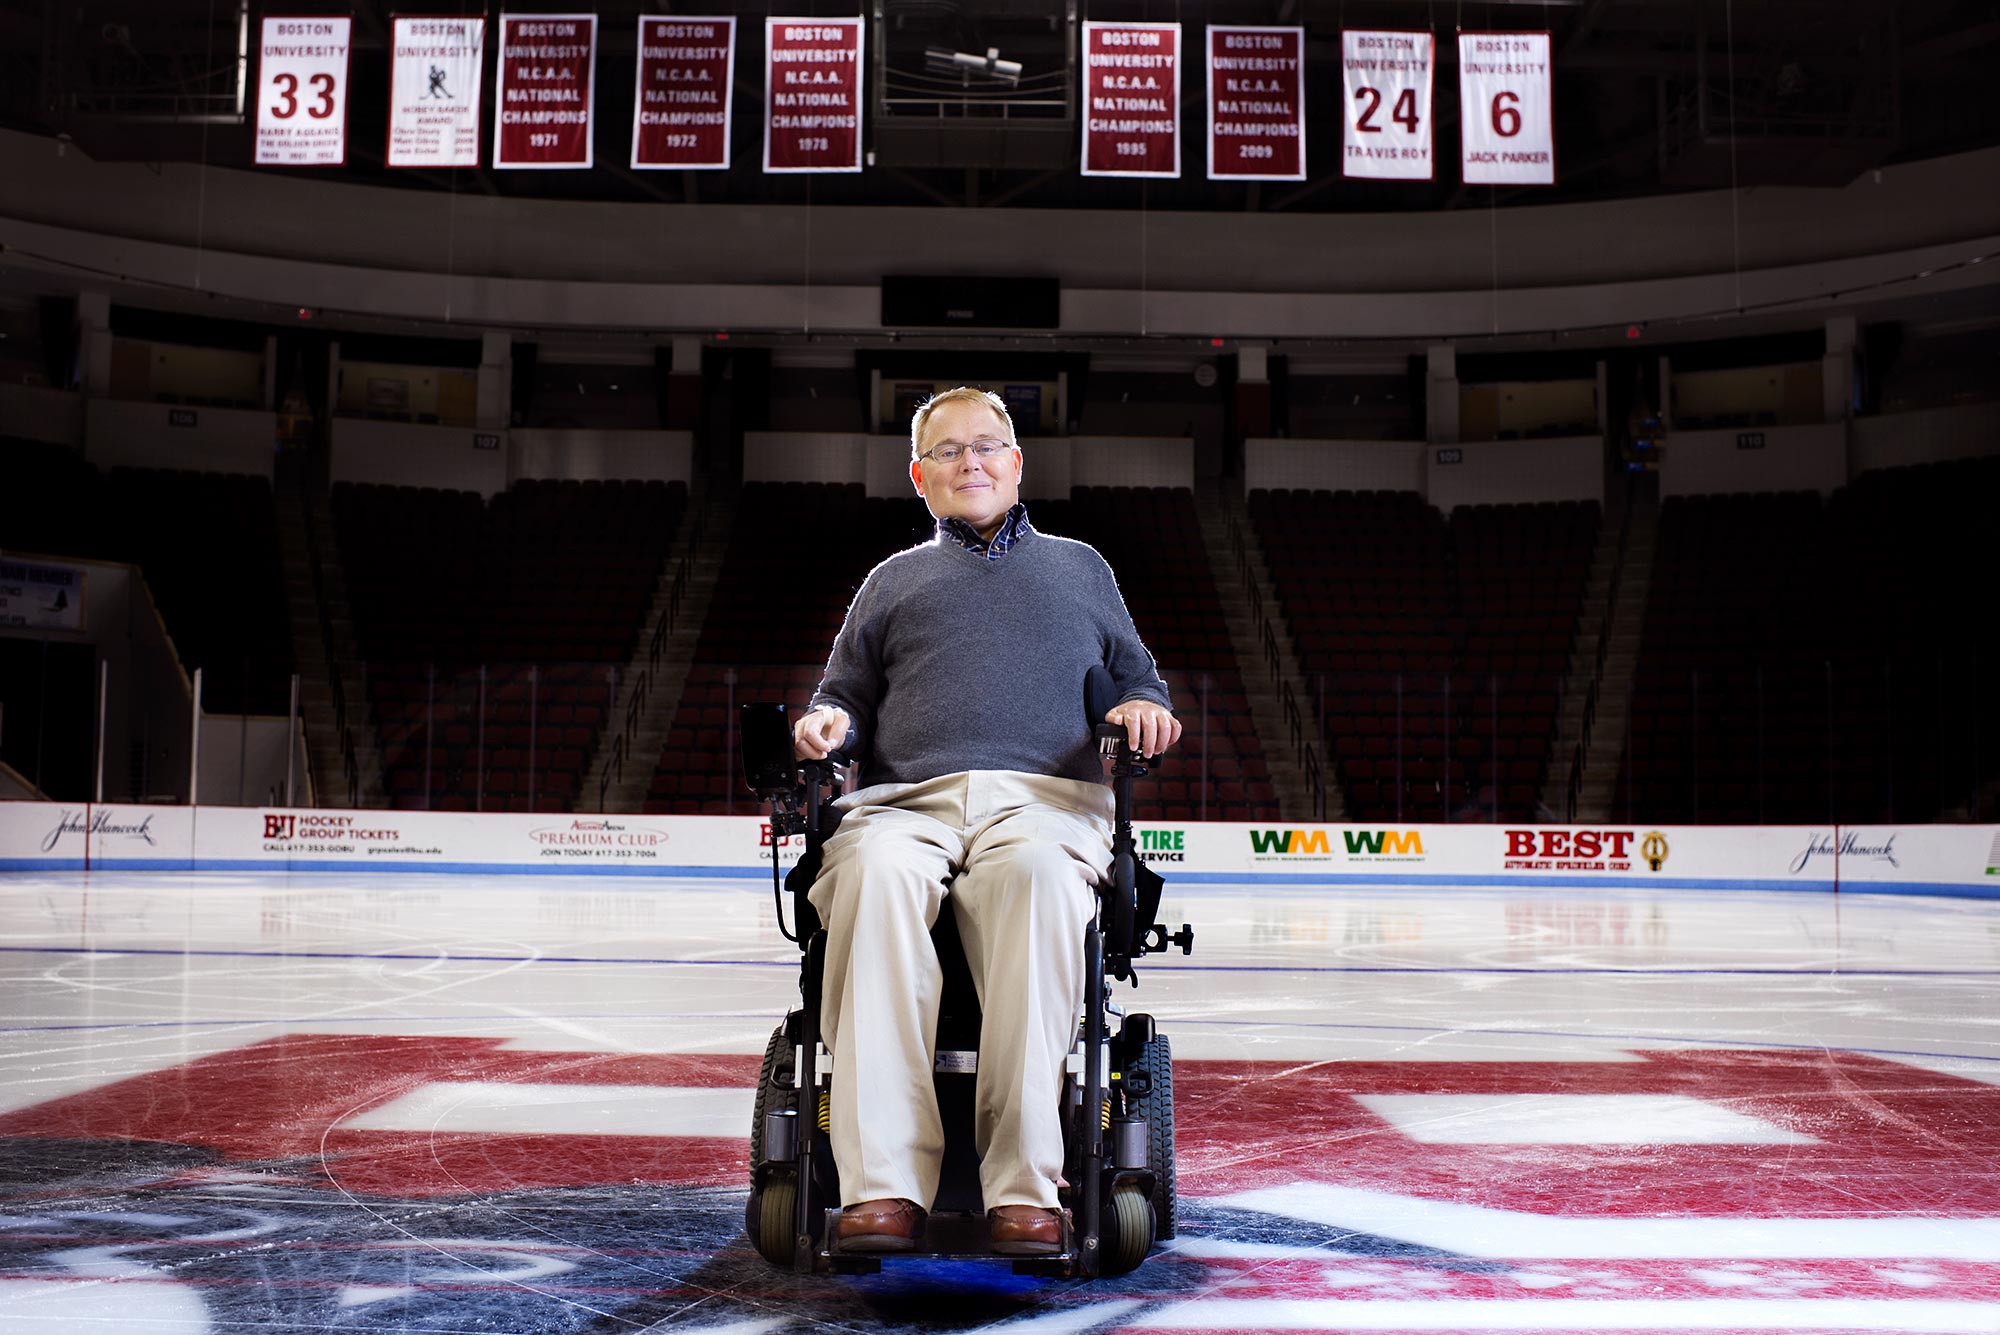 Photo of Travis Roy on Monday, October 6, 2015 at center ice of the Agganis Arena. He wears a grey sweater and his retired jersey number, 24, is seen hanging from the ceiling.